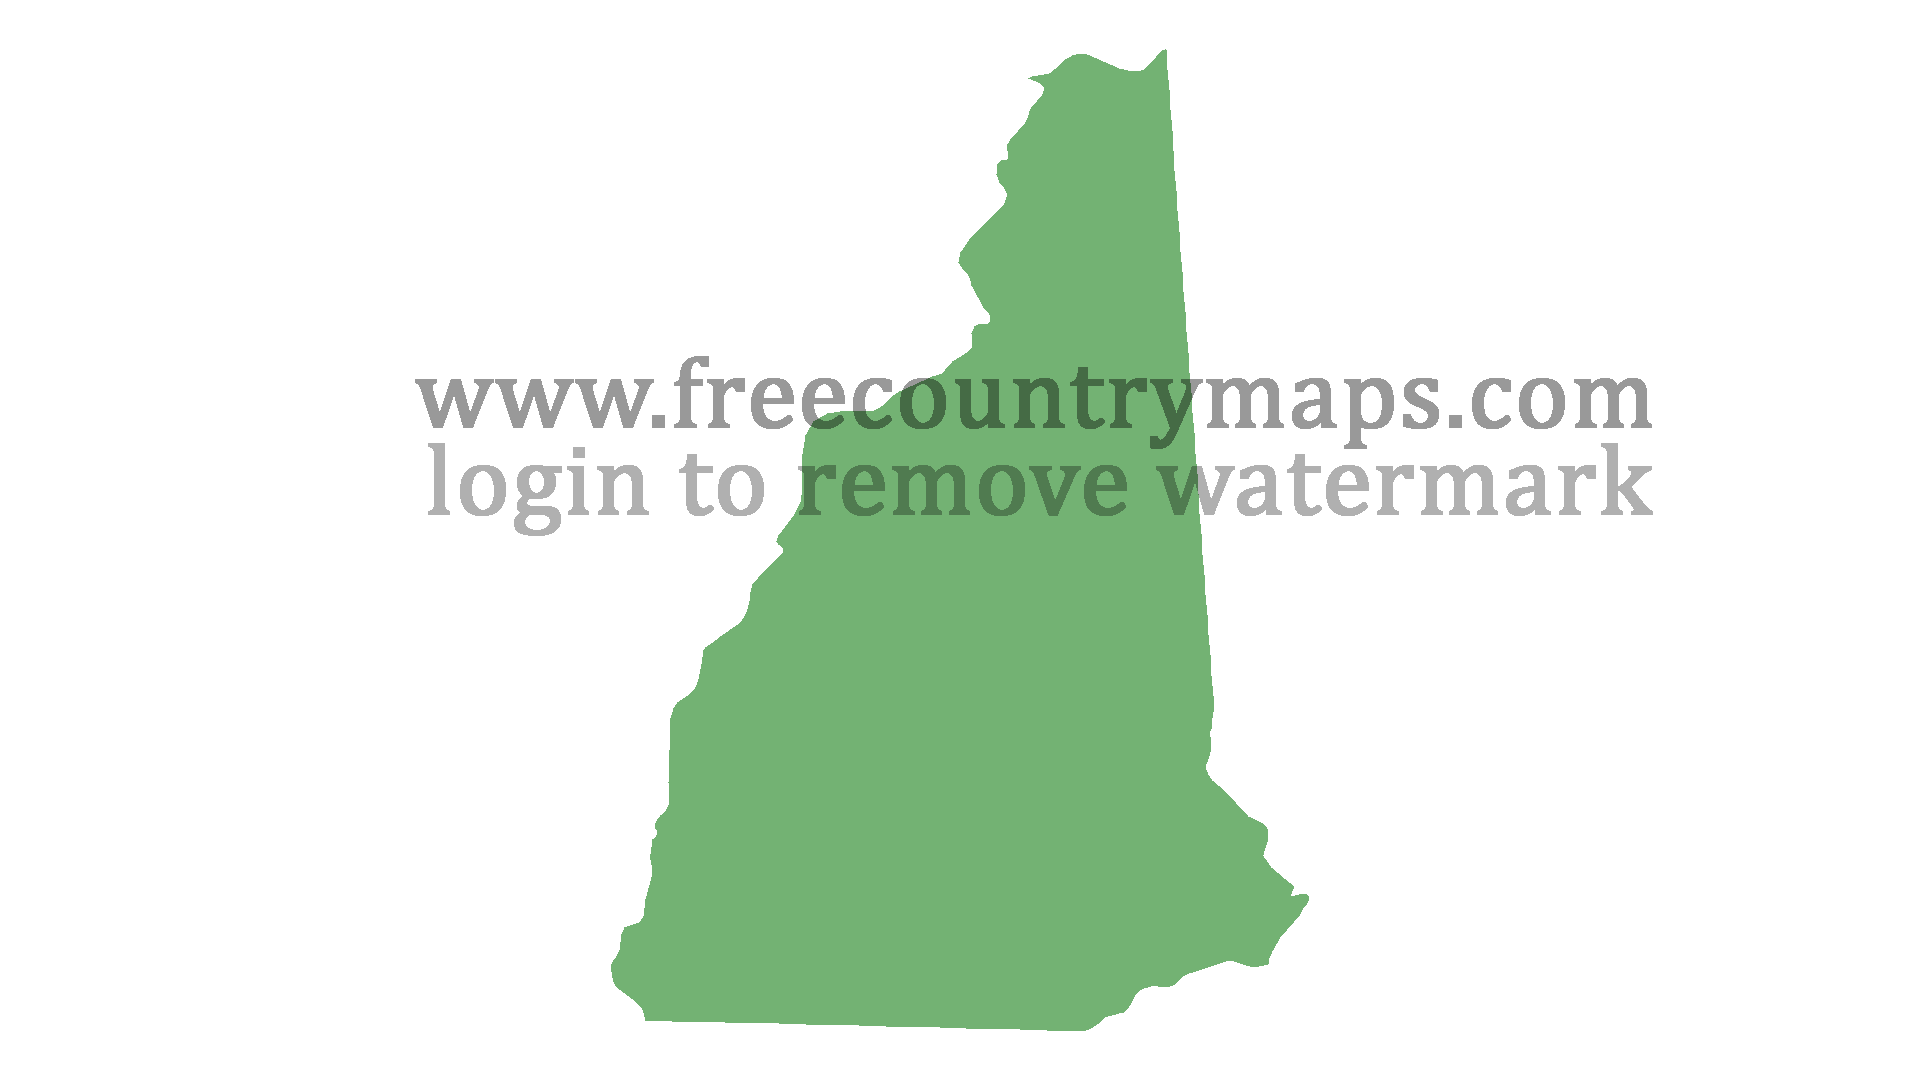 Blank Map of the State of New Hampshire in 1080p